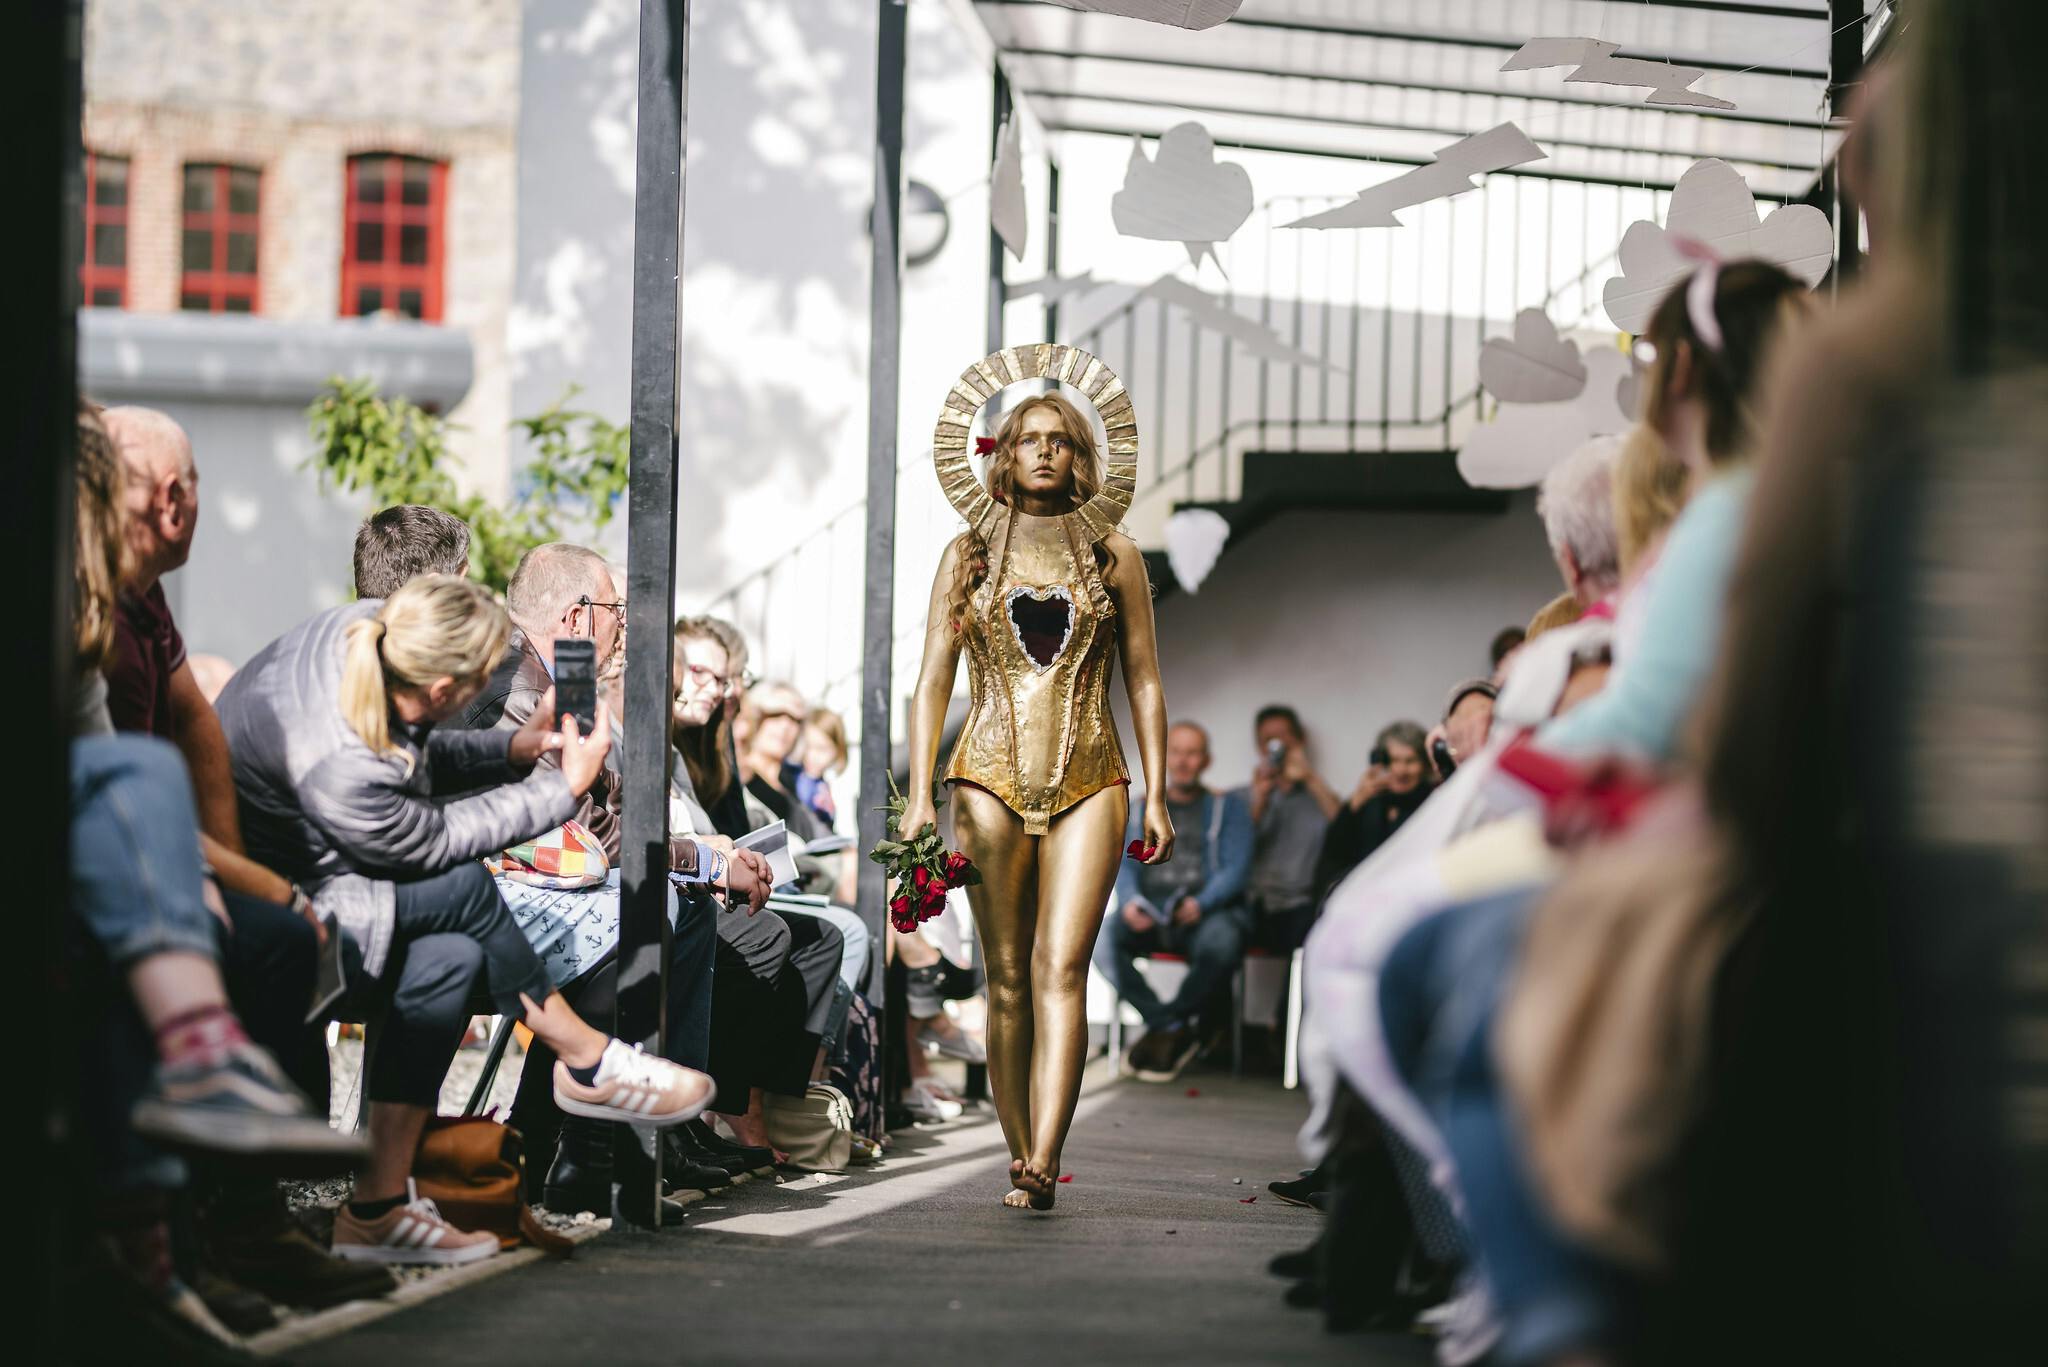 A model dressed in a gold outfit walks down the catwalk at Arts University Plymouths Pre degree Summer Show 2019 Photo by Luke Frost